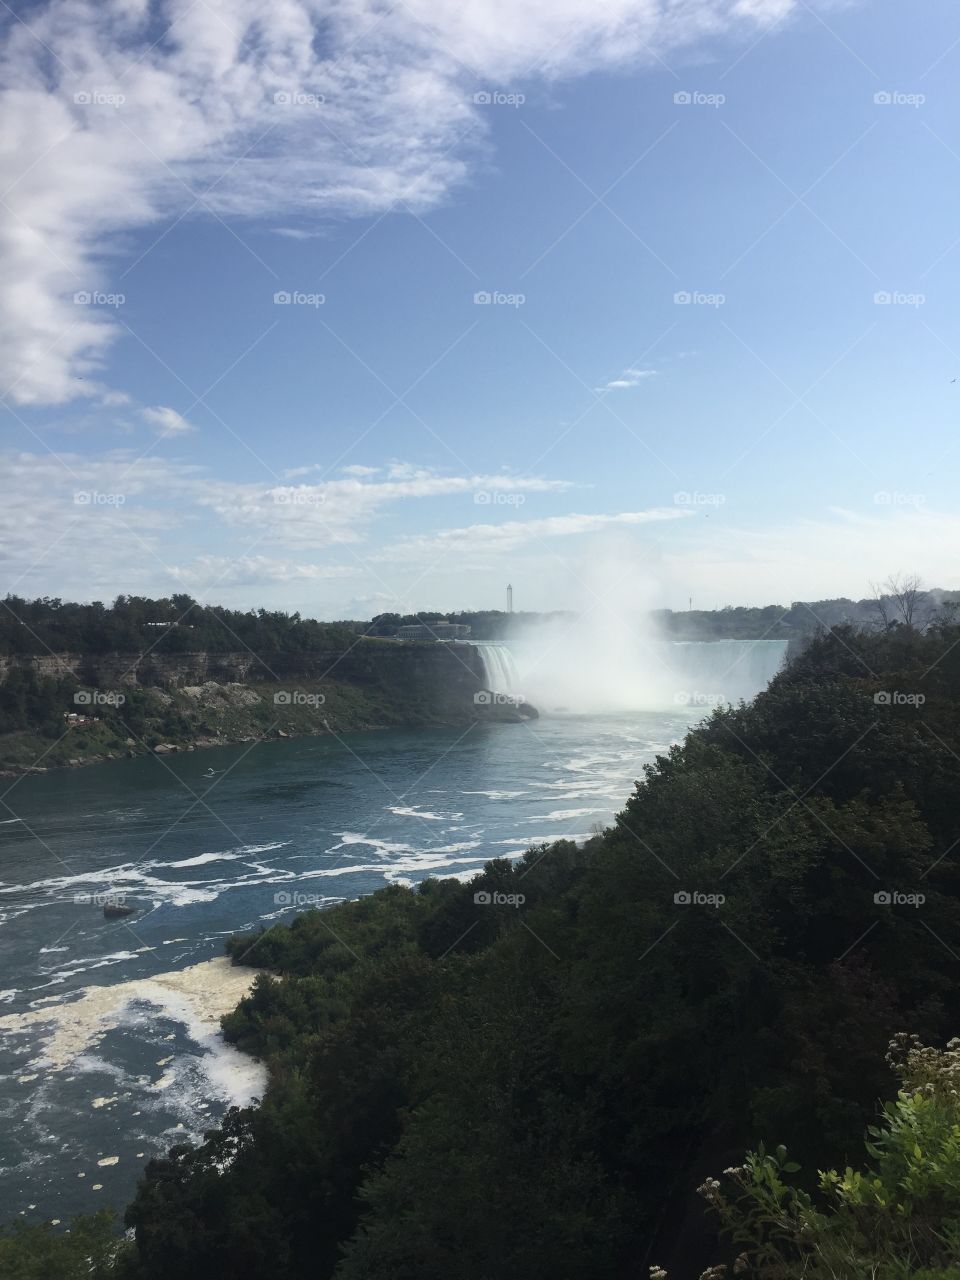 Mist ascending towards the heavens from the amazing falls of Niagara on a wonderful clear day